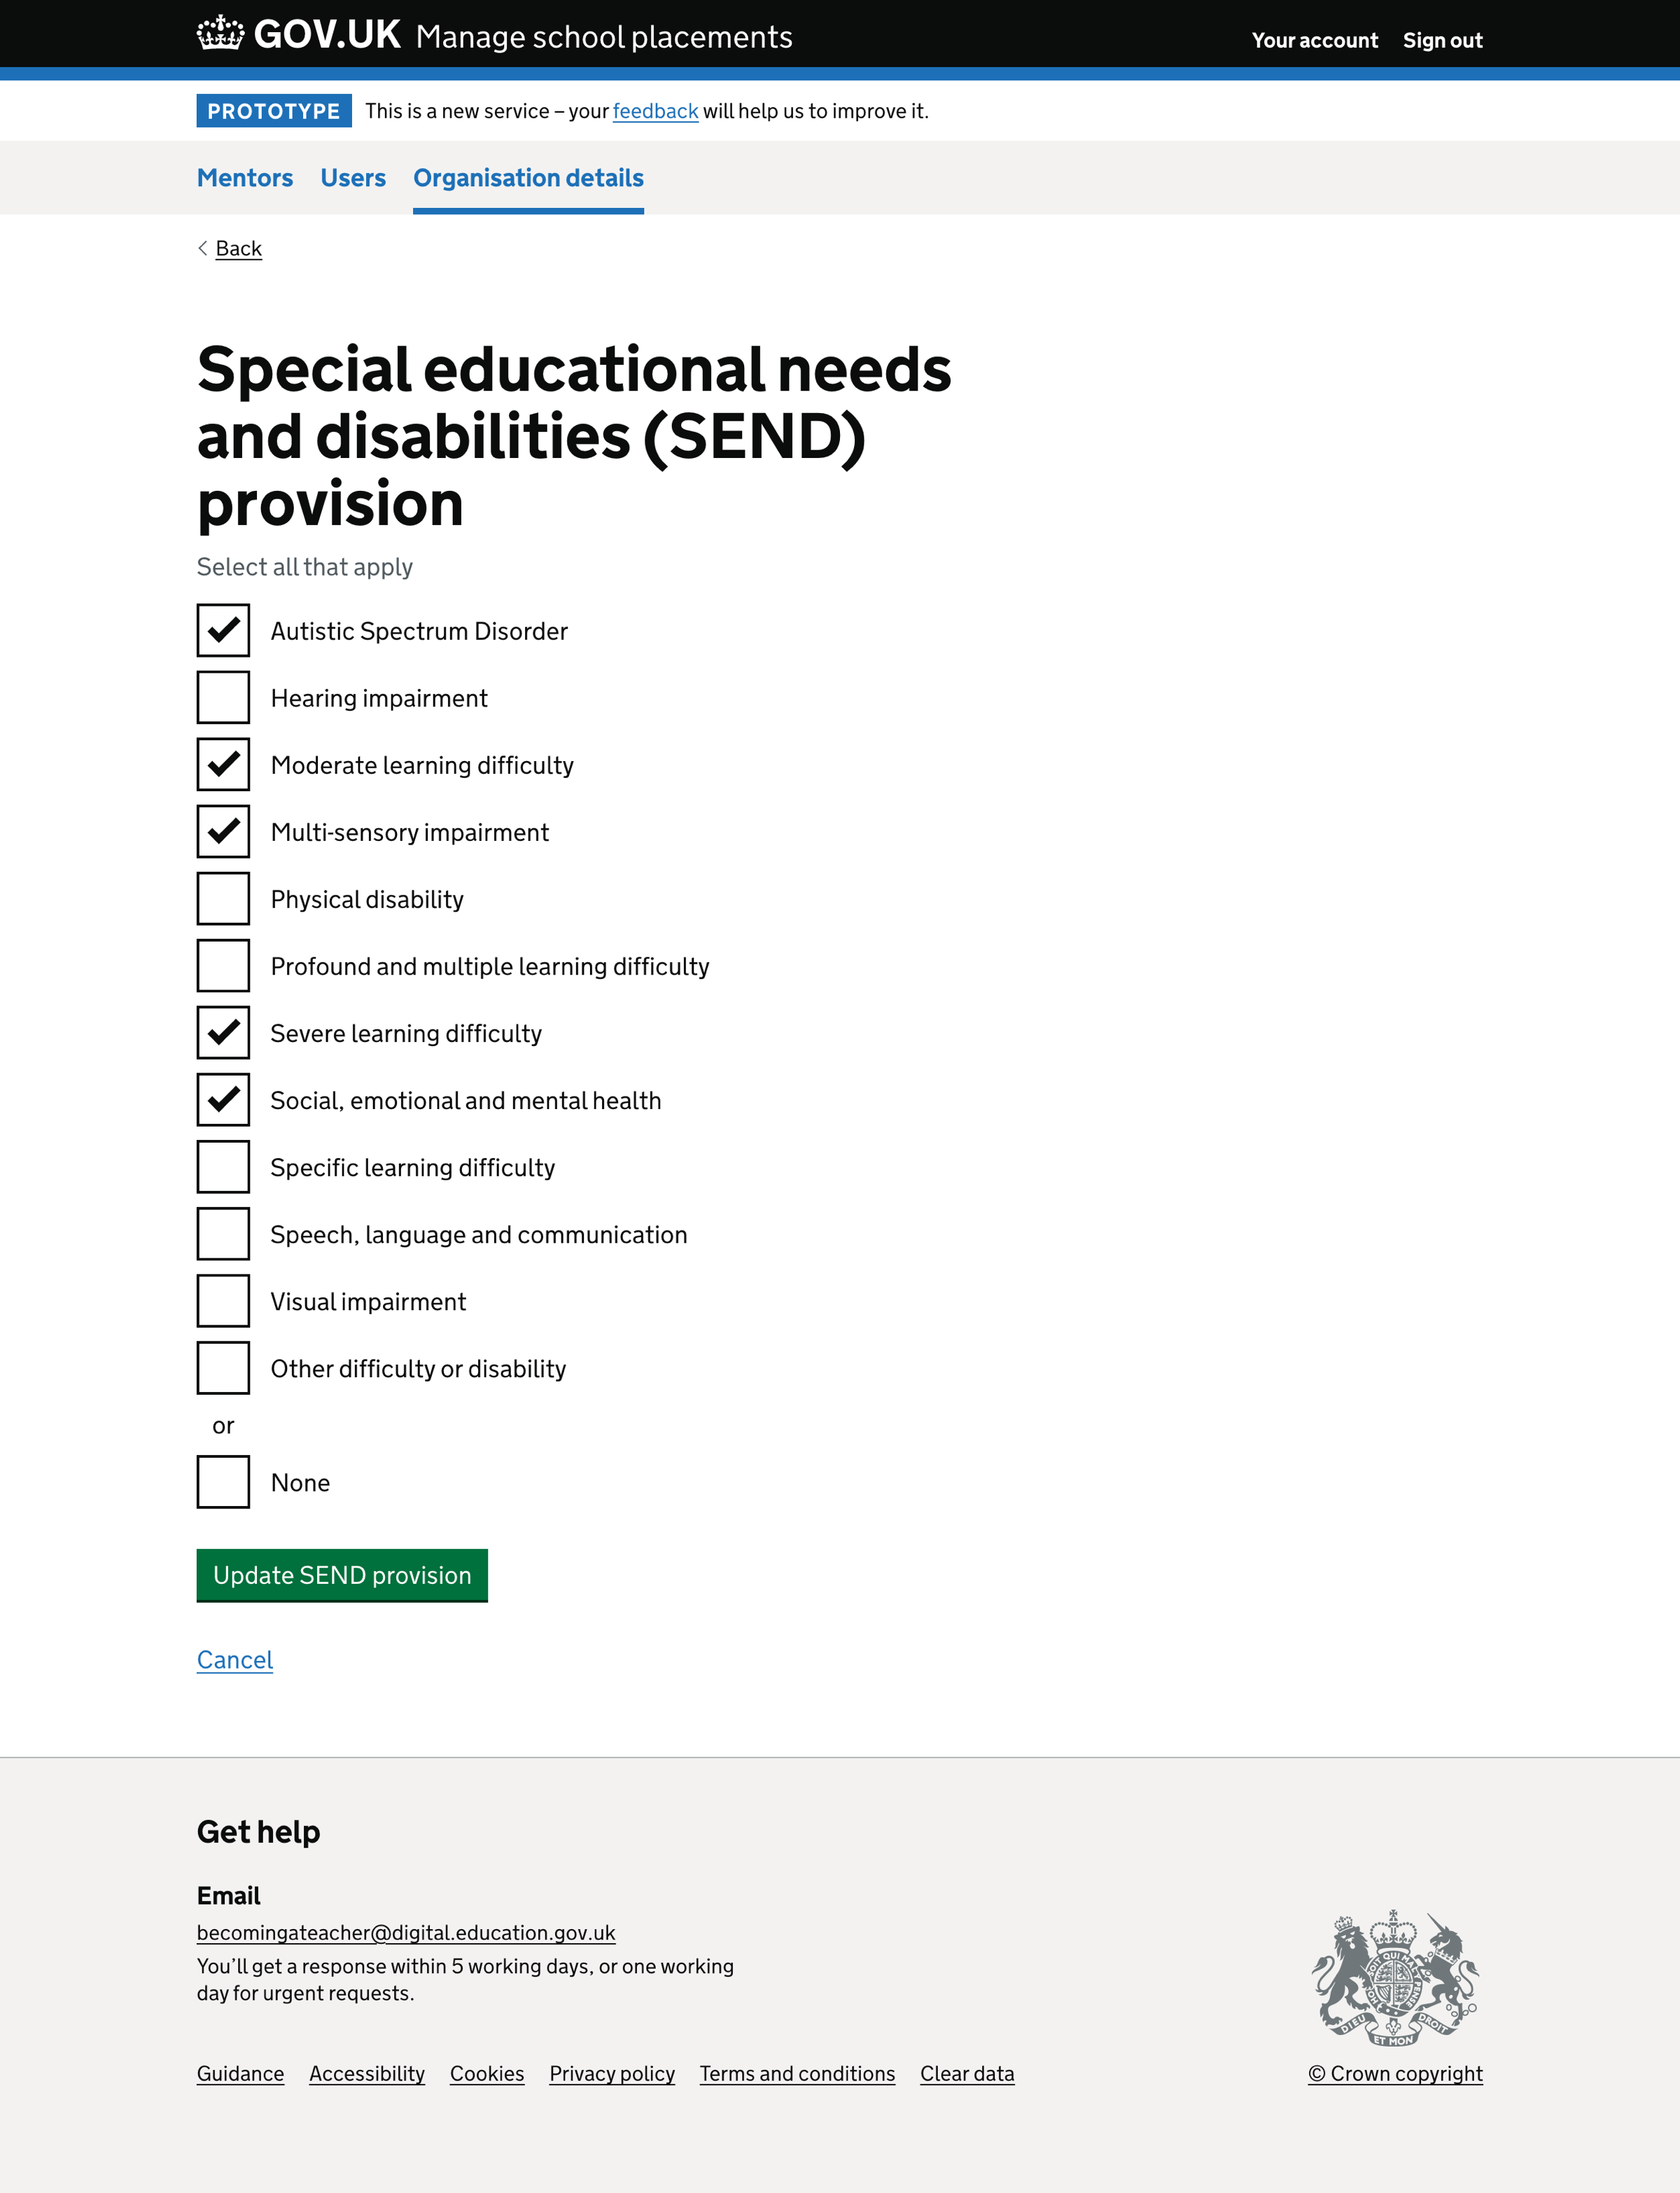 Image showing the organisation special educational needs and disabilities provision question